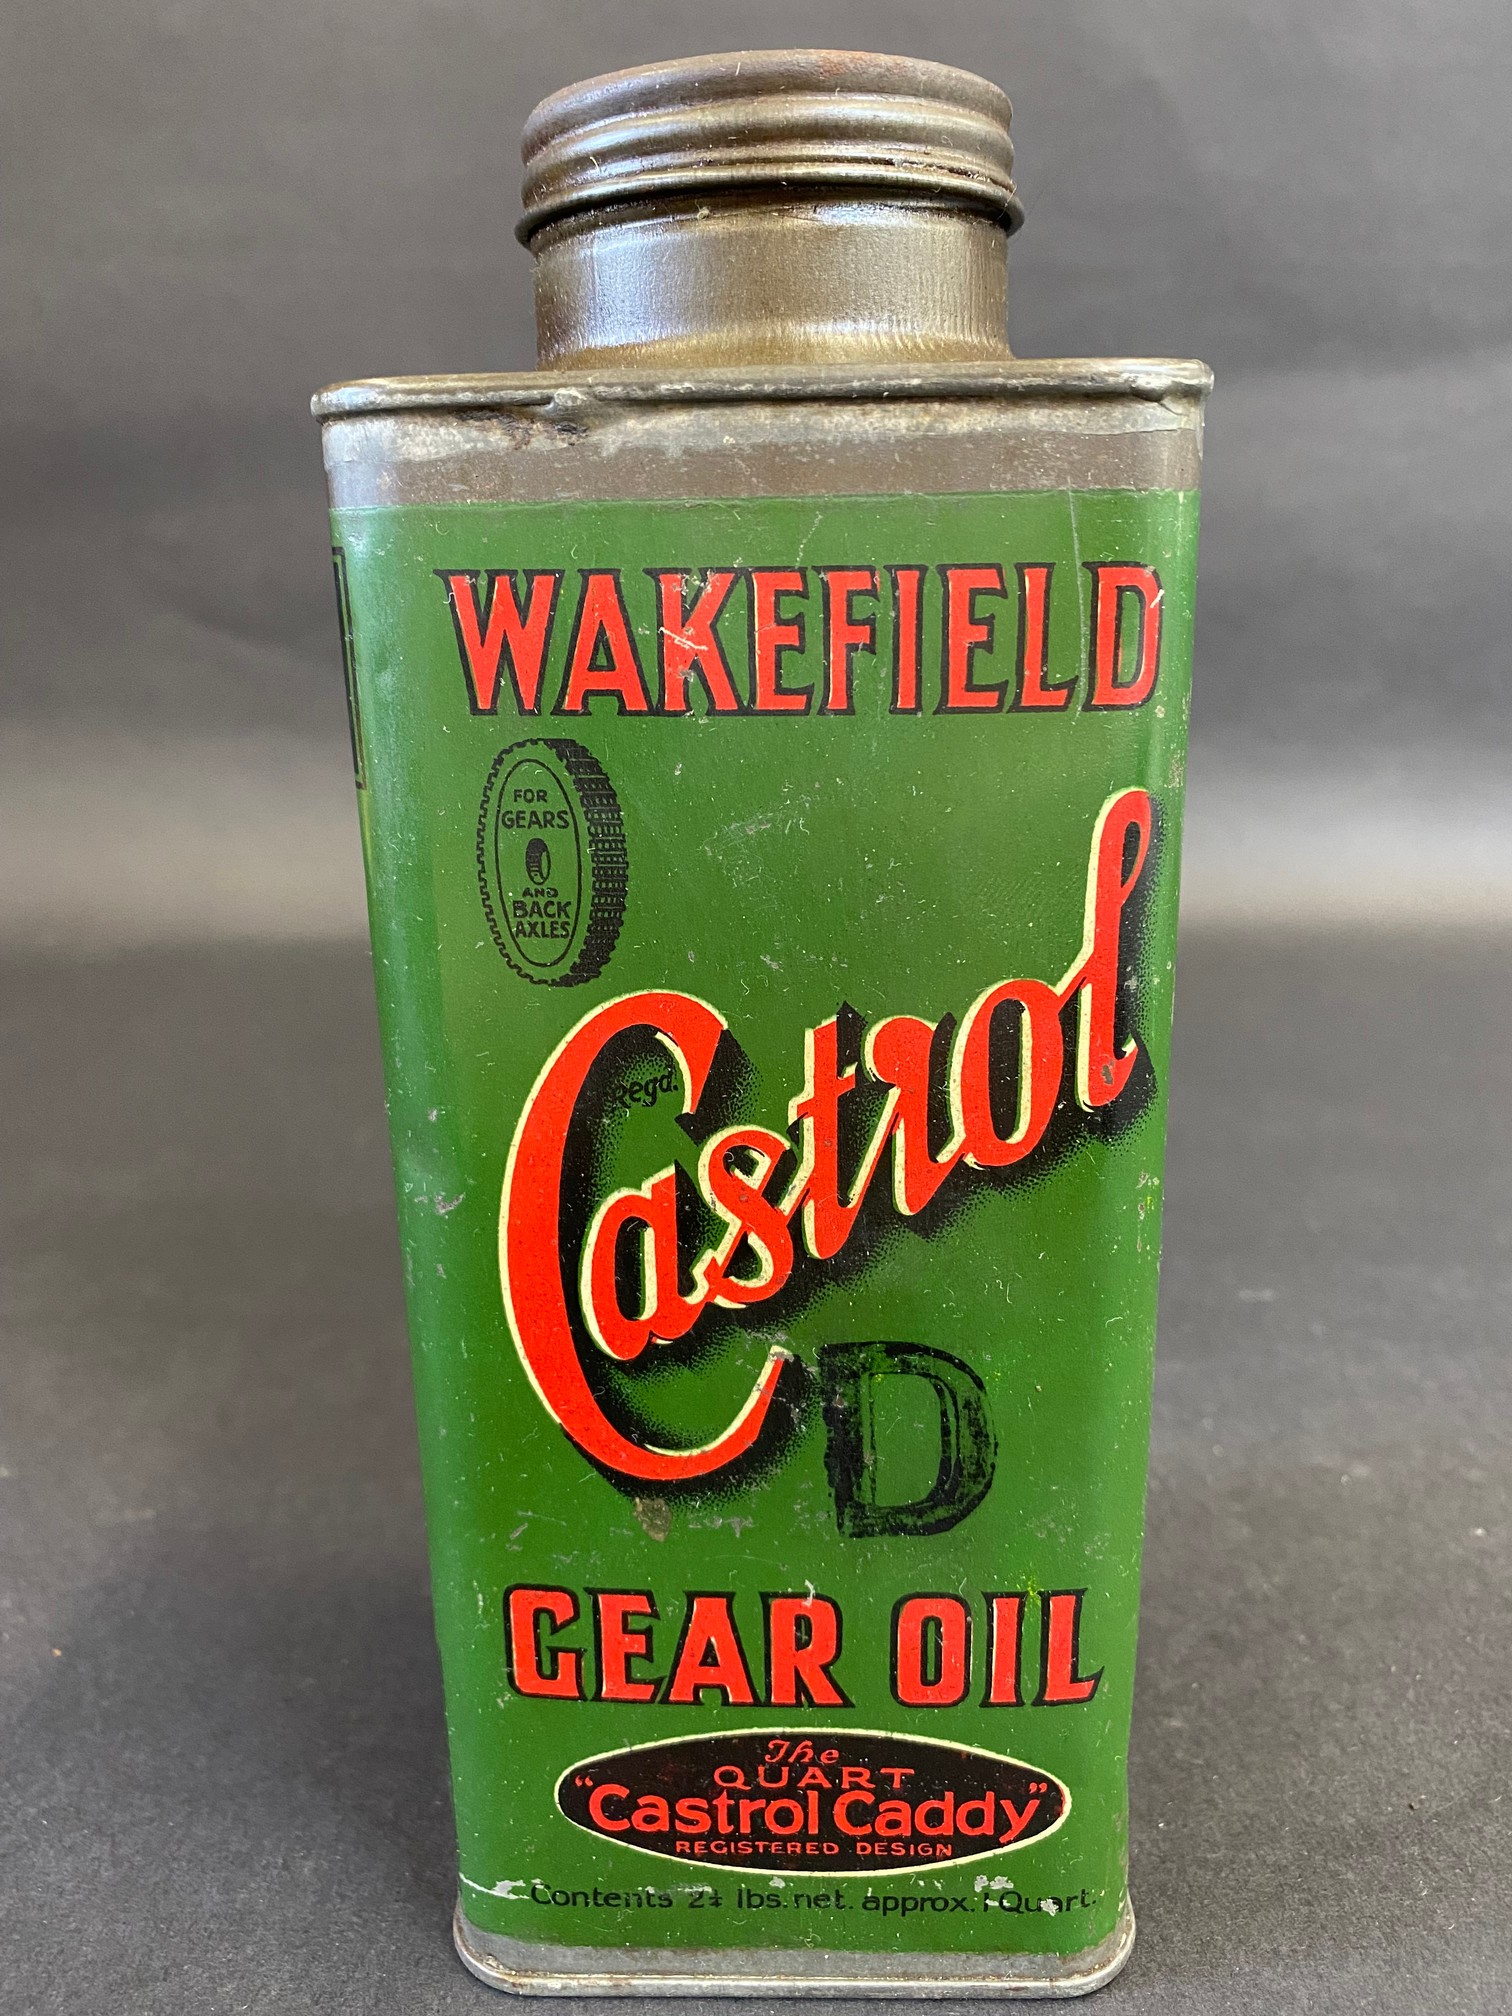 A Wakefield Castrol Gear Oil 'D' grade square caddy can, in very good condition.